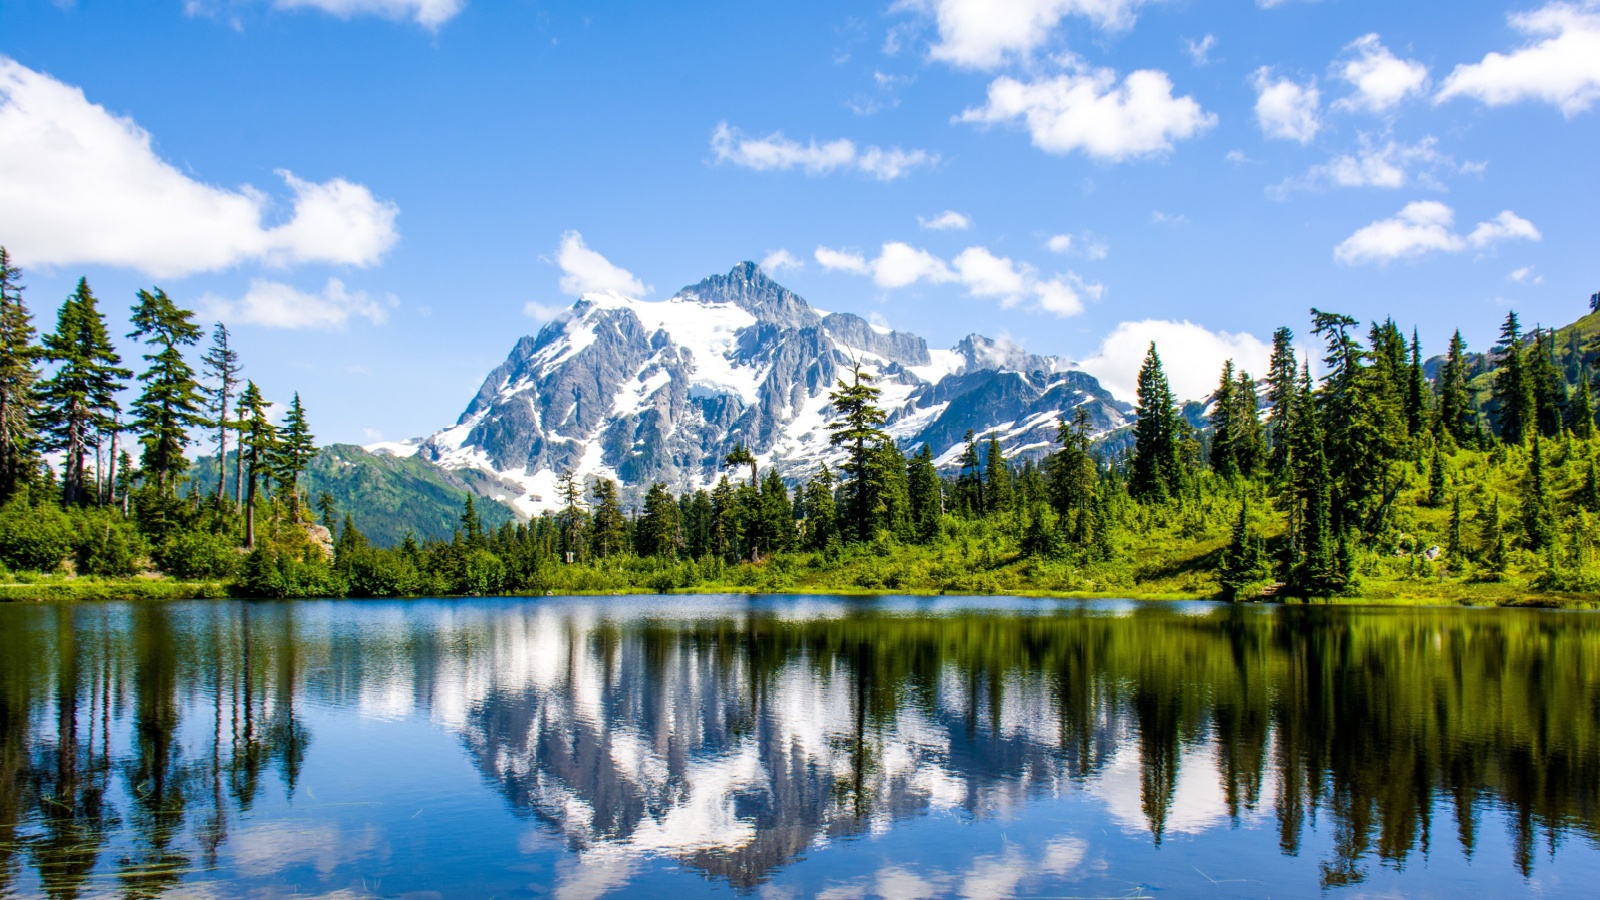 image credit: SoisudaS/Shutterstock <p>The strategy focuses on the north-central regions of Washington, where vast forests, mountains, and valleys form an ideal habitat for grizzly bears. The North Cascades area is identified as one of the very few locations in the Lower 48 states capable of supporting a sustainable grizzly bear population, proposing the introduction of up to 200 bears over the next century.</p>